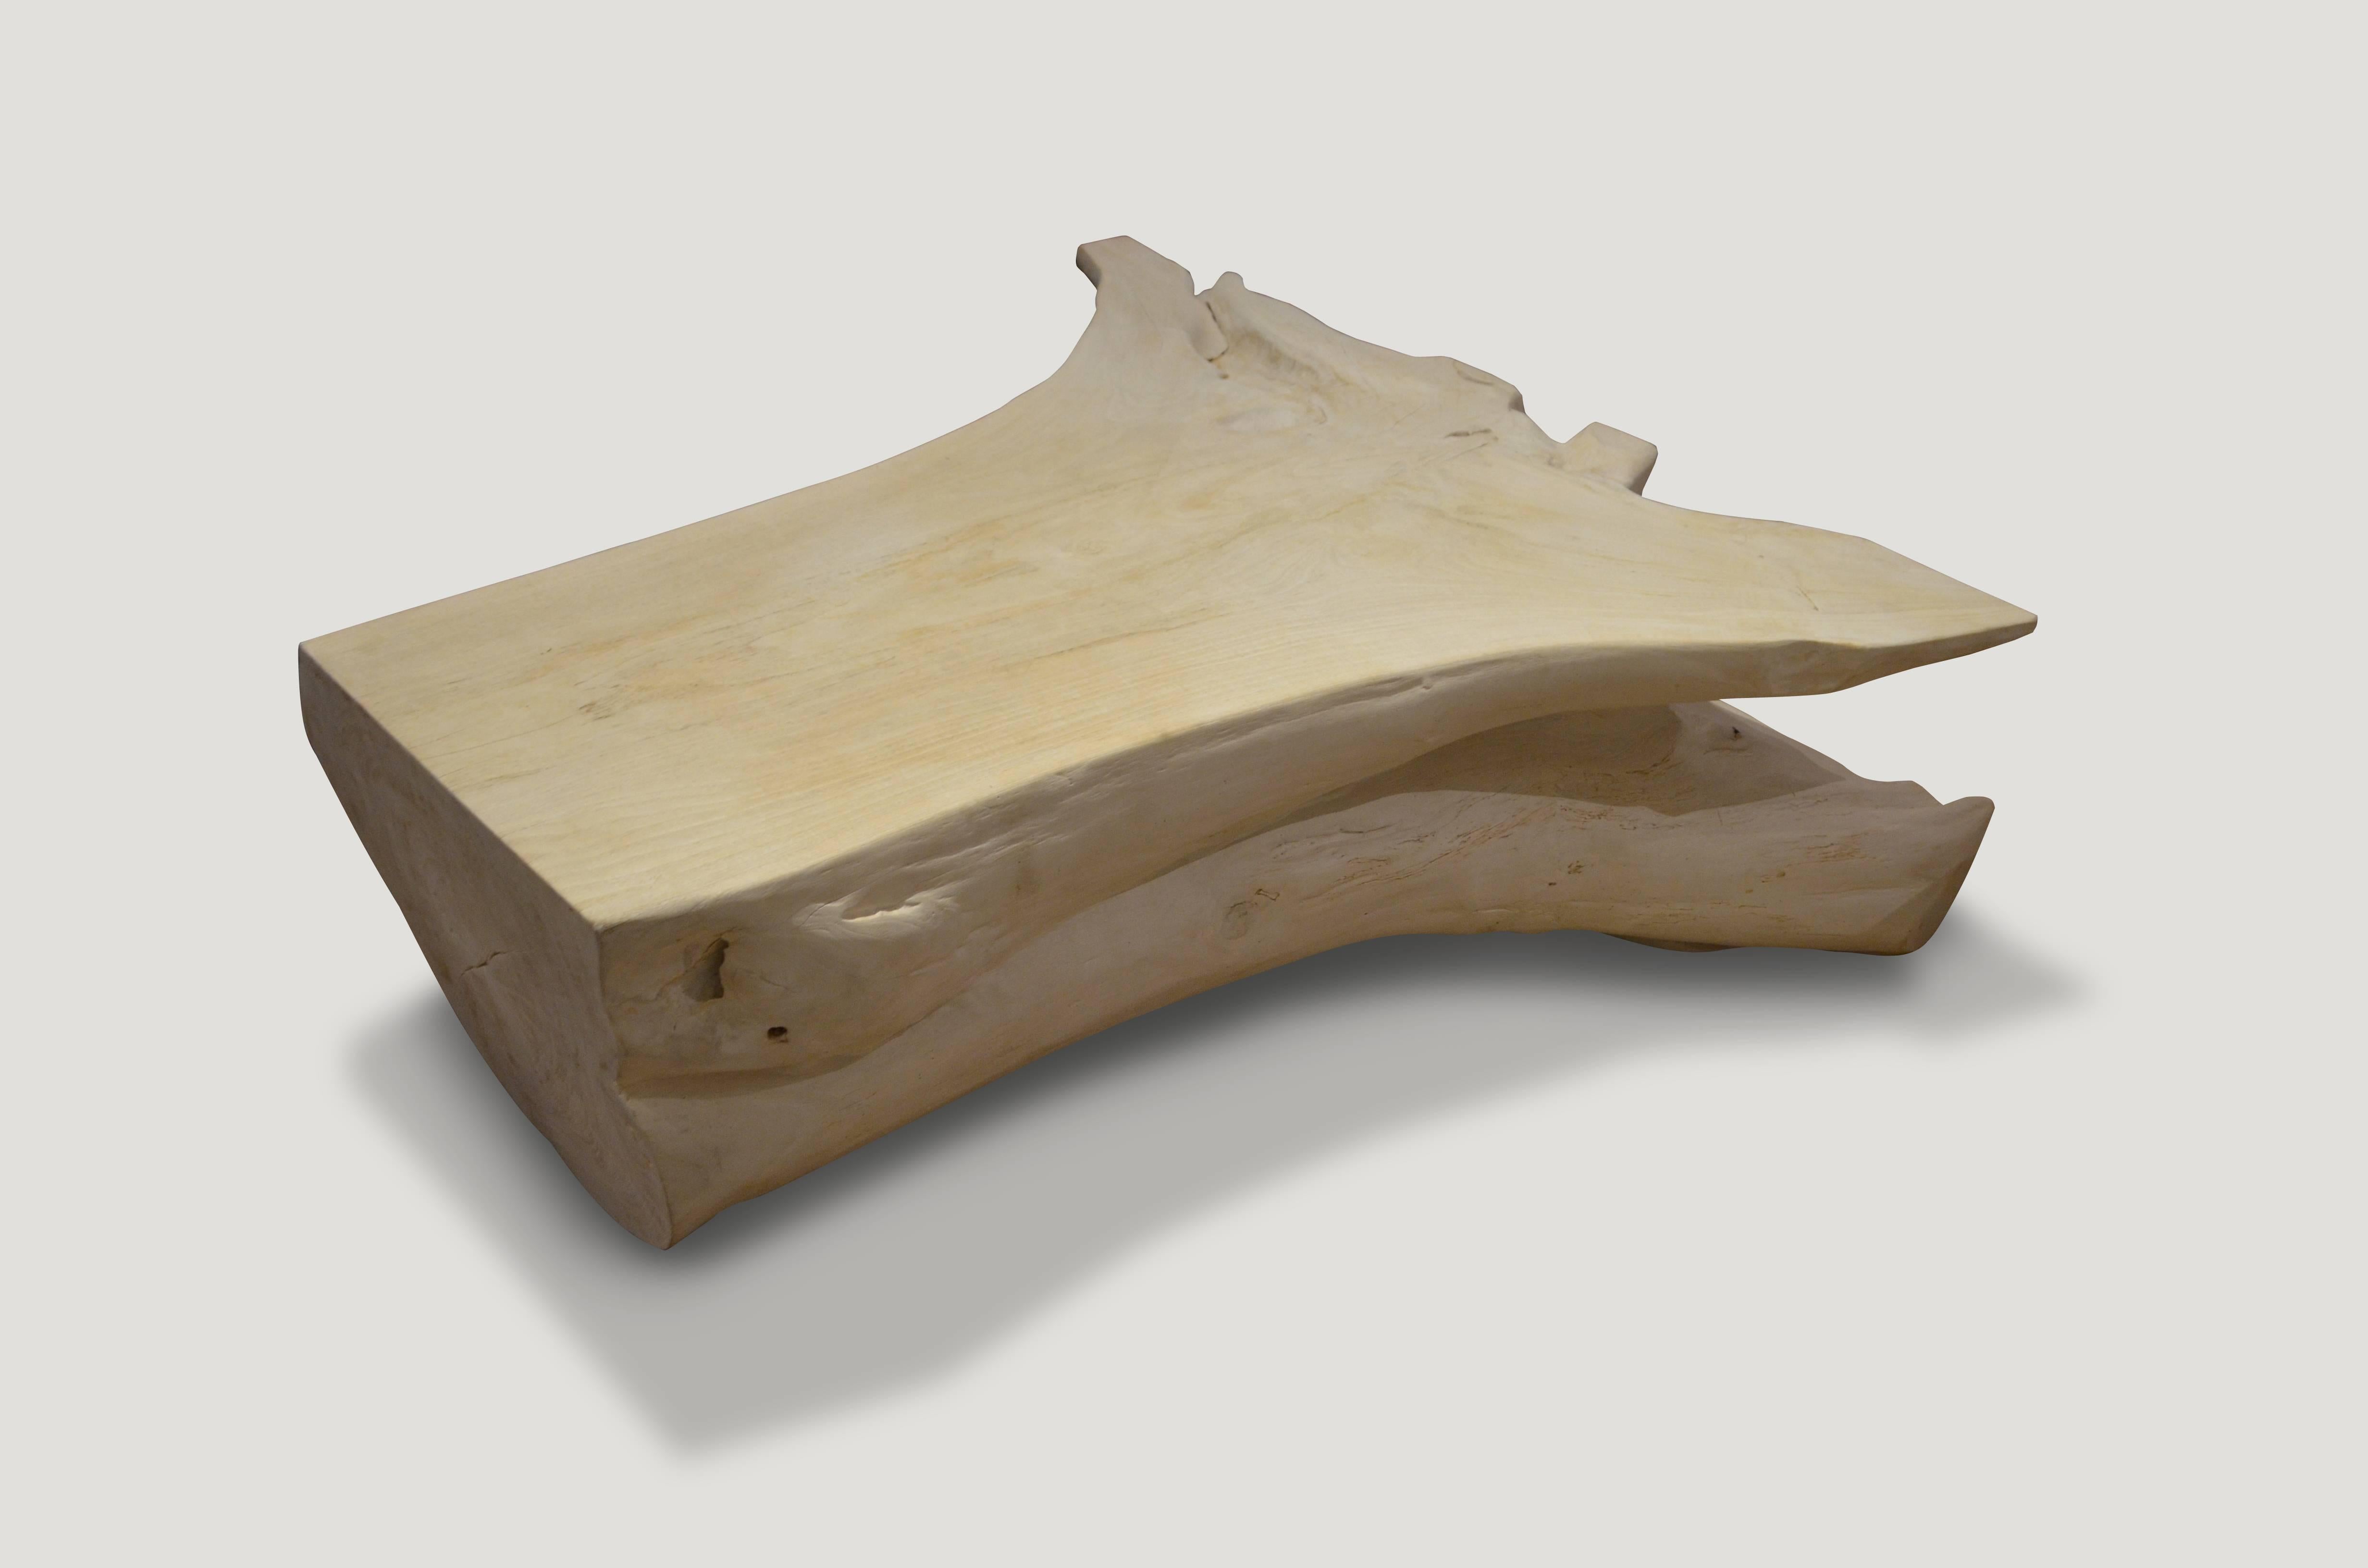 Impressive single root, reclaimed bleached teak wood coffee table.

The St. Barts collection features an exciting new line of organic white wash and natural weathered teak furniture. The reclaimed teak is left to bake in the sun and sea salt air for